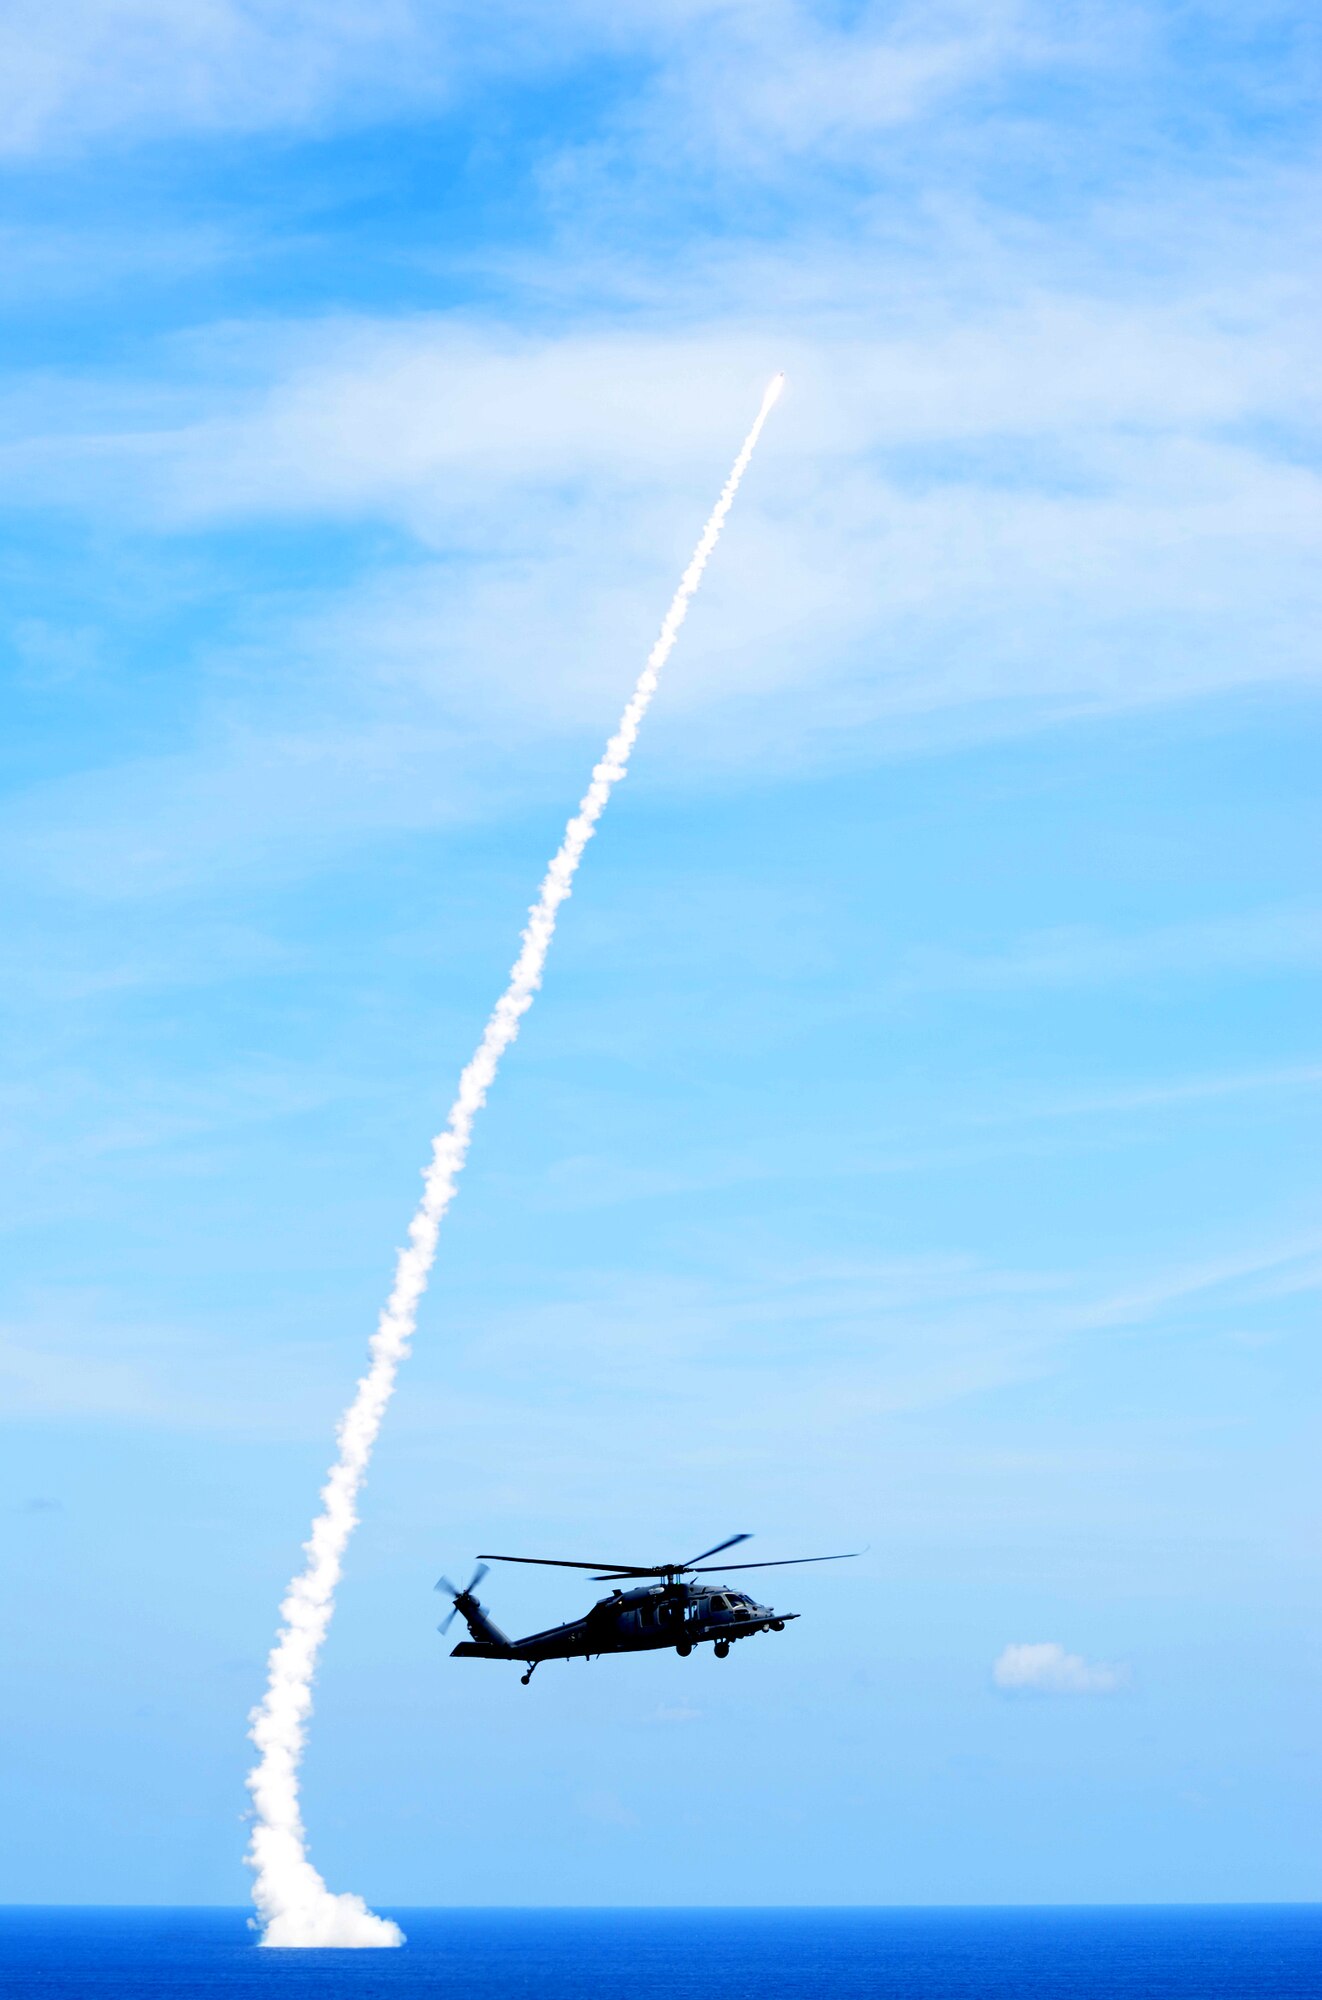 Airmen from the 920th Rescue Wing, Patrick Air Force Base, Fla., cleared the launch path of mariners in an HH-60G Pave Hawk helicopter off the nearby coast of Cape Canaveral Air Force Station to allow the safe launch of D-5 Trident Missile Feb. 22. The U.S. Navy's USS Tennessee, an Ohio-class ballistic missile submarine, underwent demonstration and shakedown operations (DASO) and successfully fired the D-5 Trident test missile off the coast of Cape Canaveral Feb. 22. (U.S. Air Force photo/Capt. Cathleen Snow)